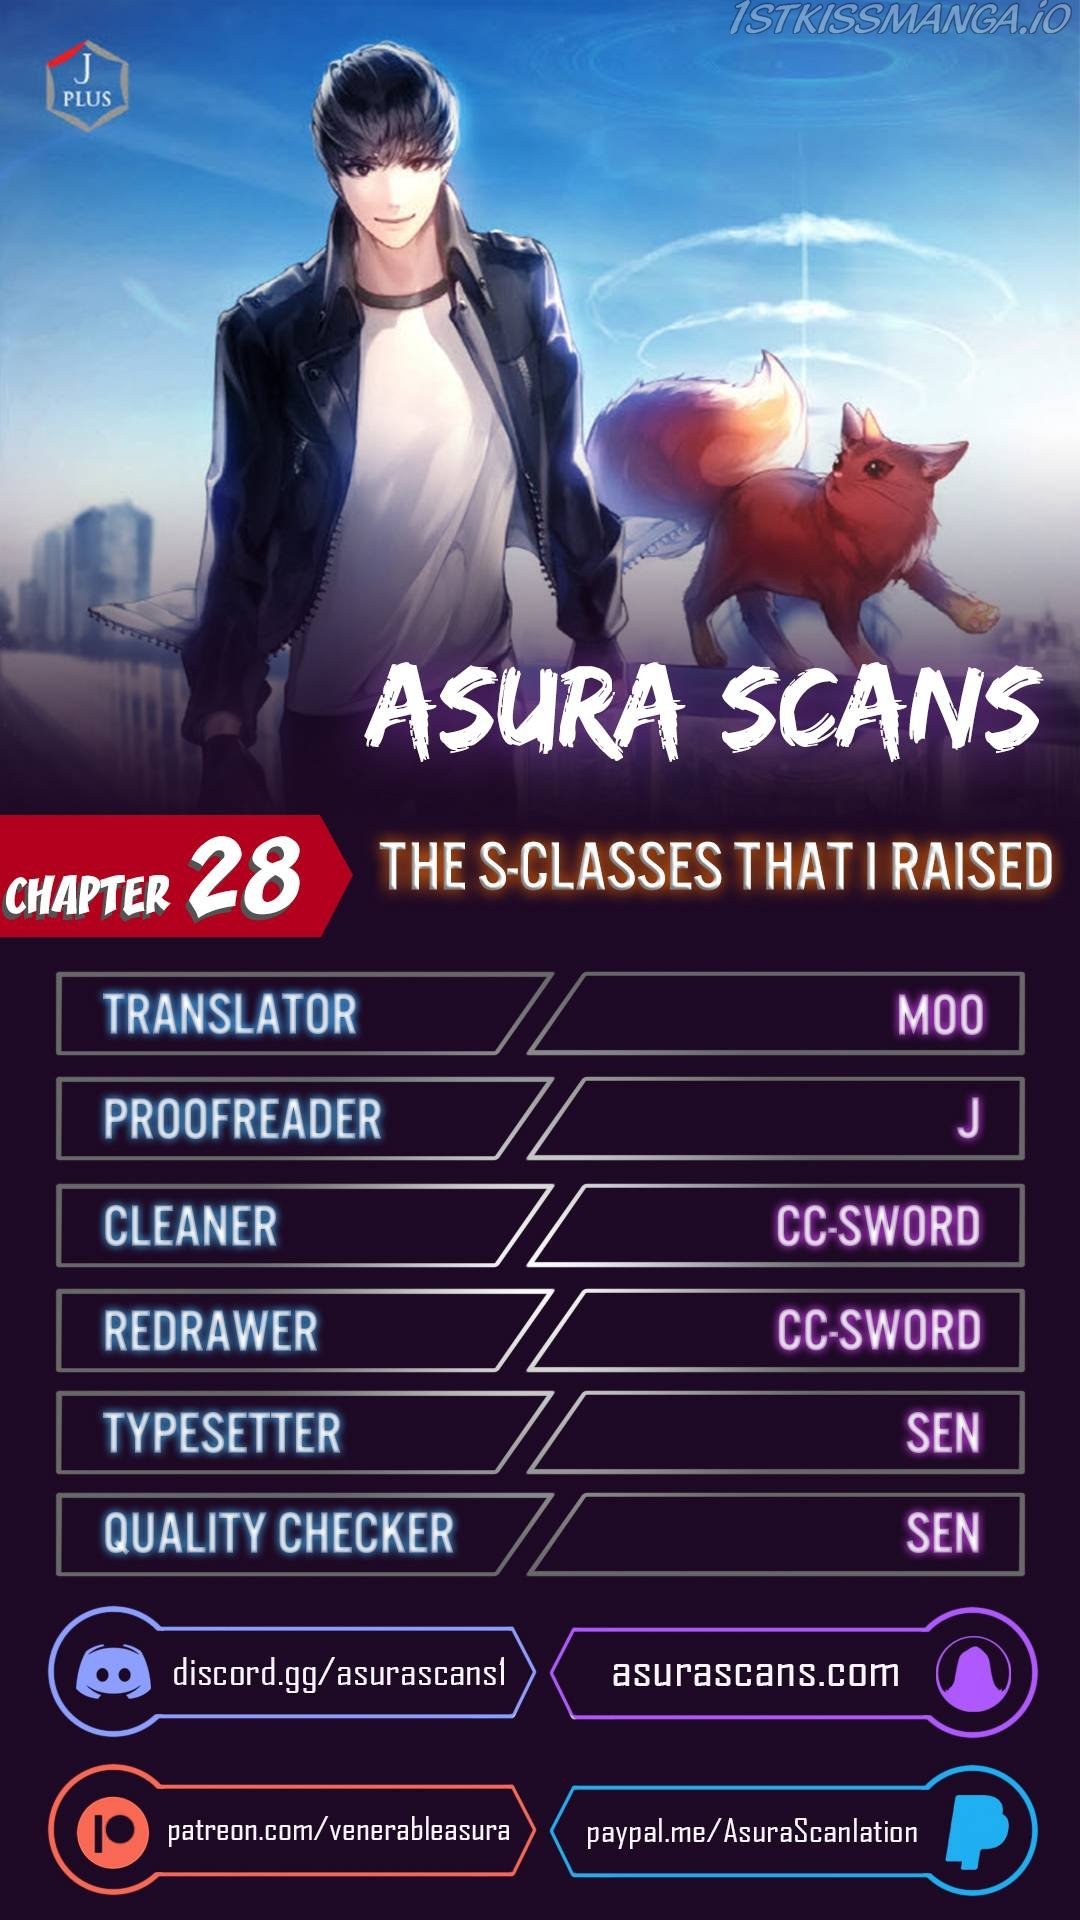 The S-Classes That I Raised chapter 28